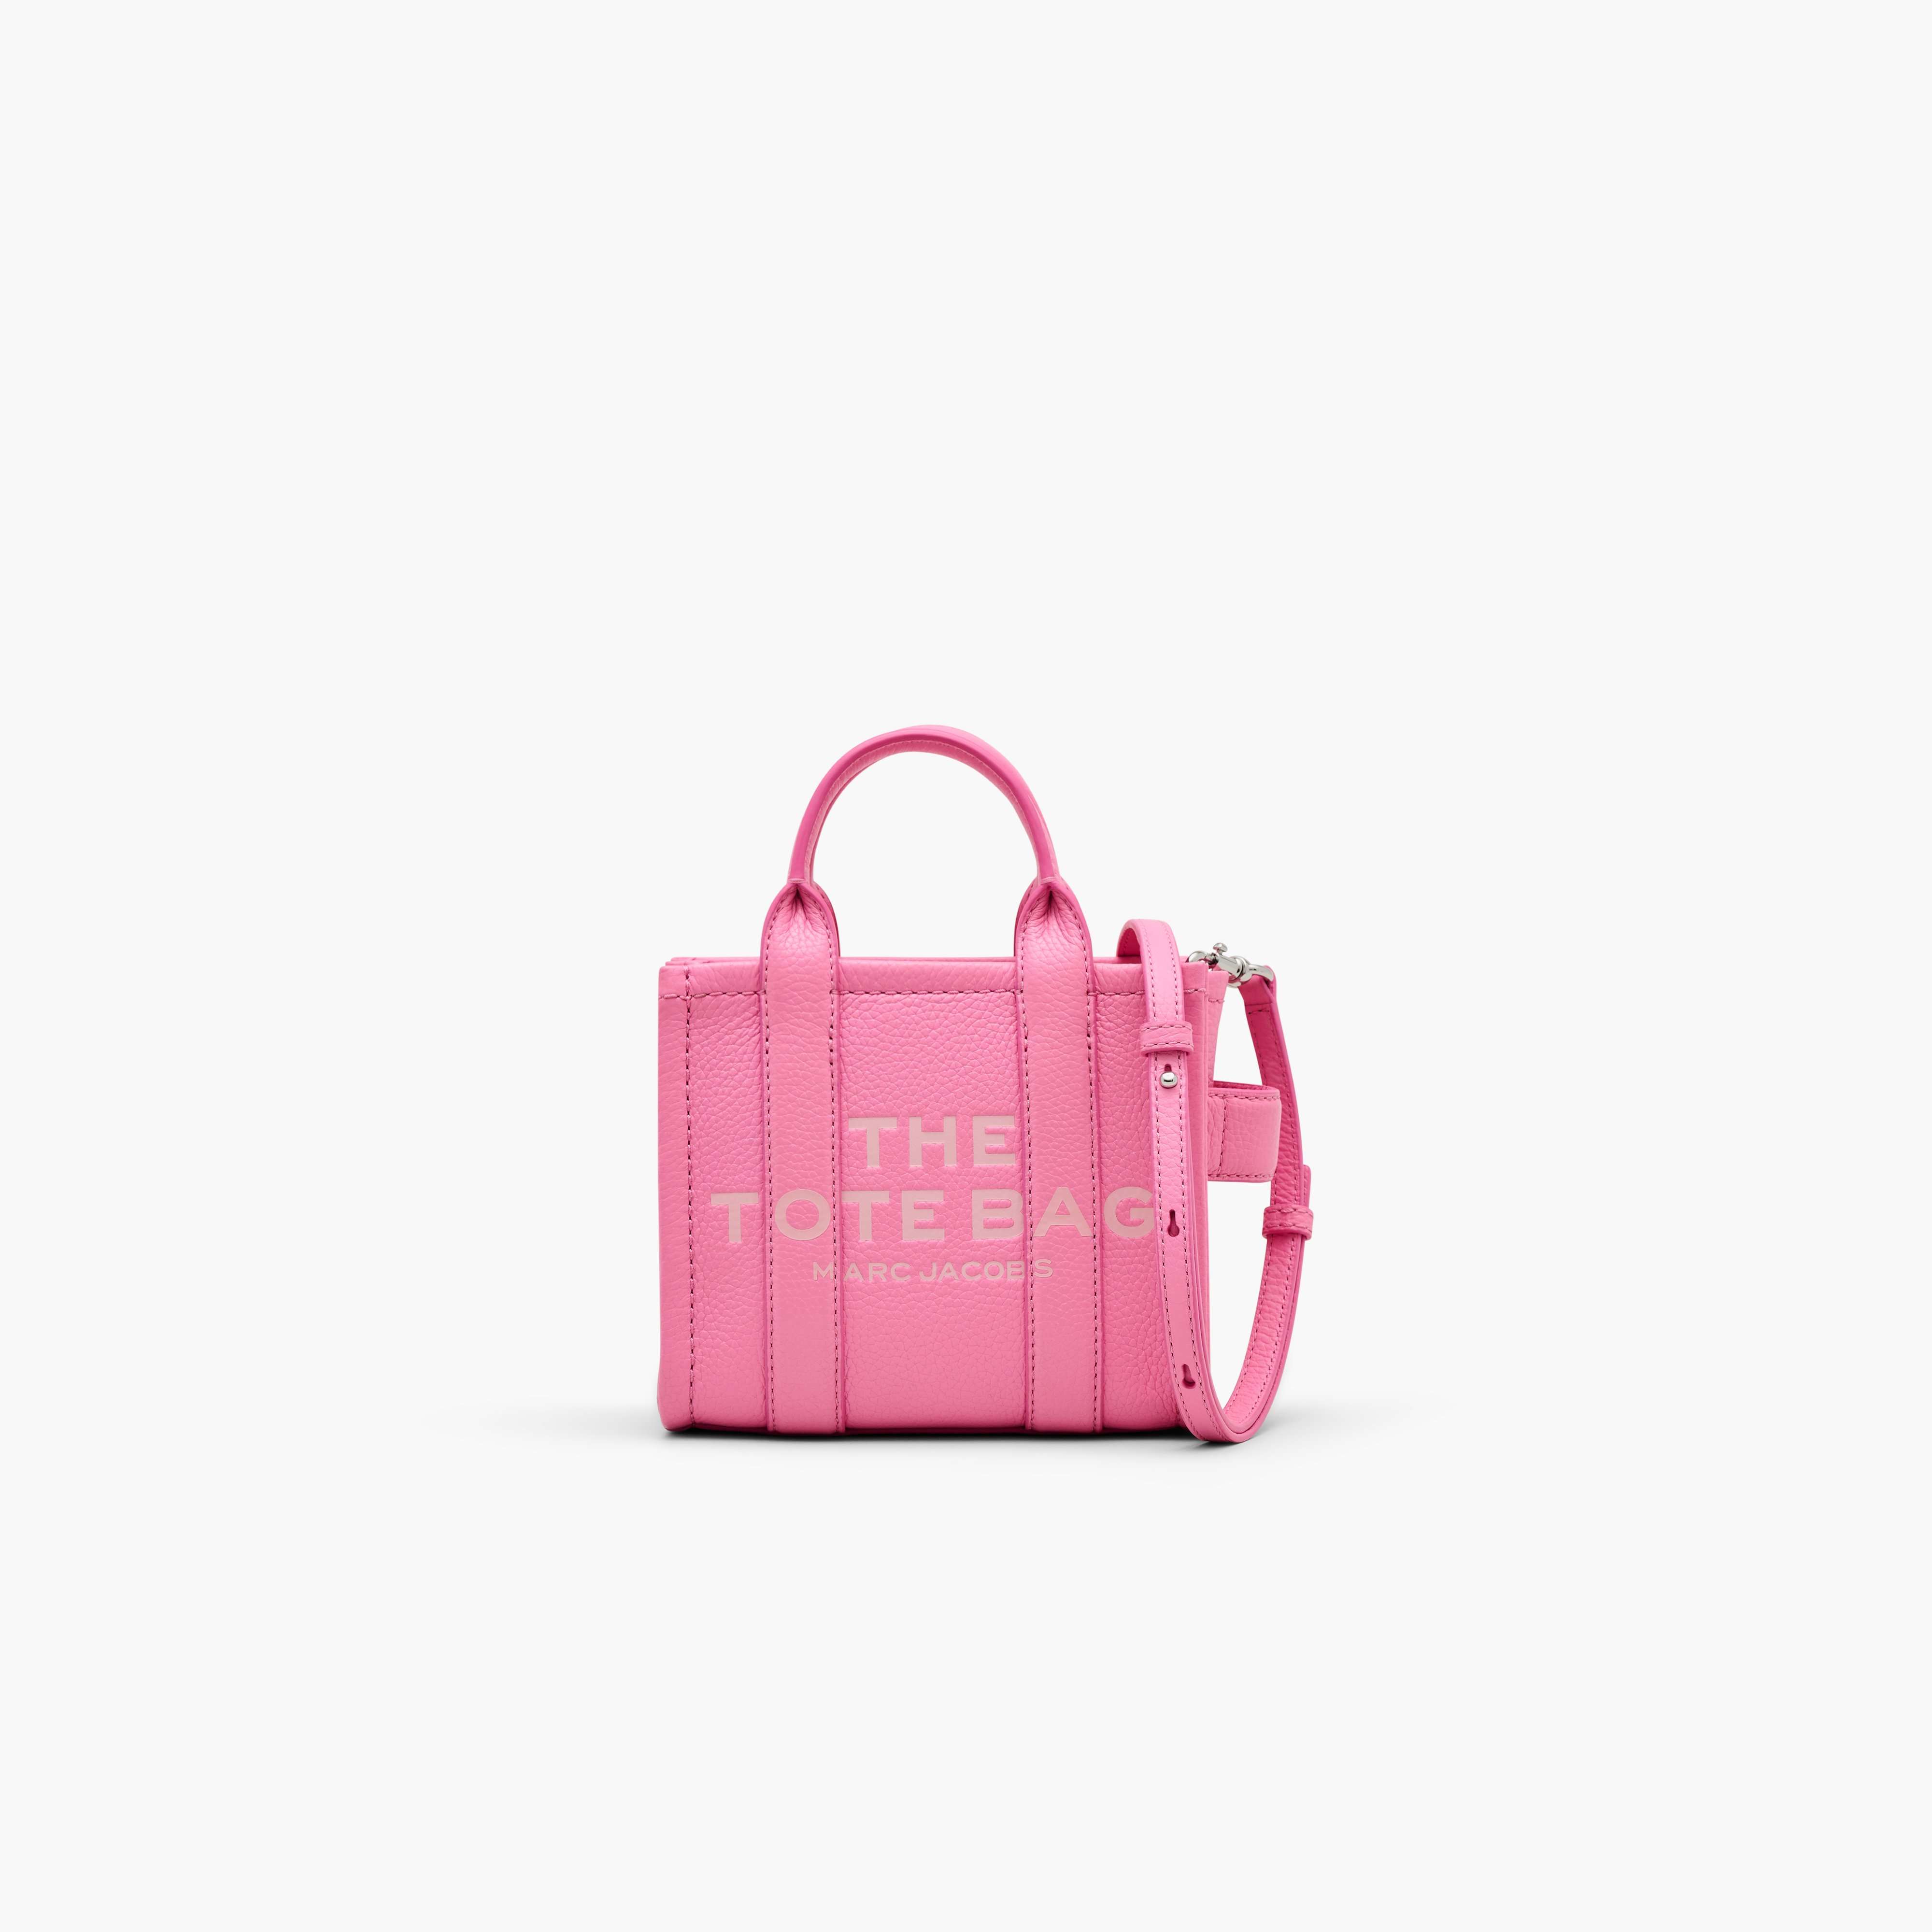 The Leather Crossbody Tote Bag in Petal Pink